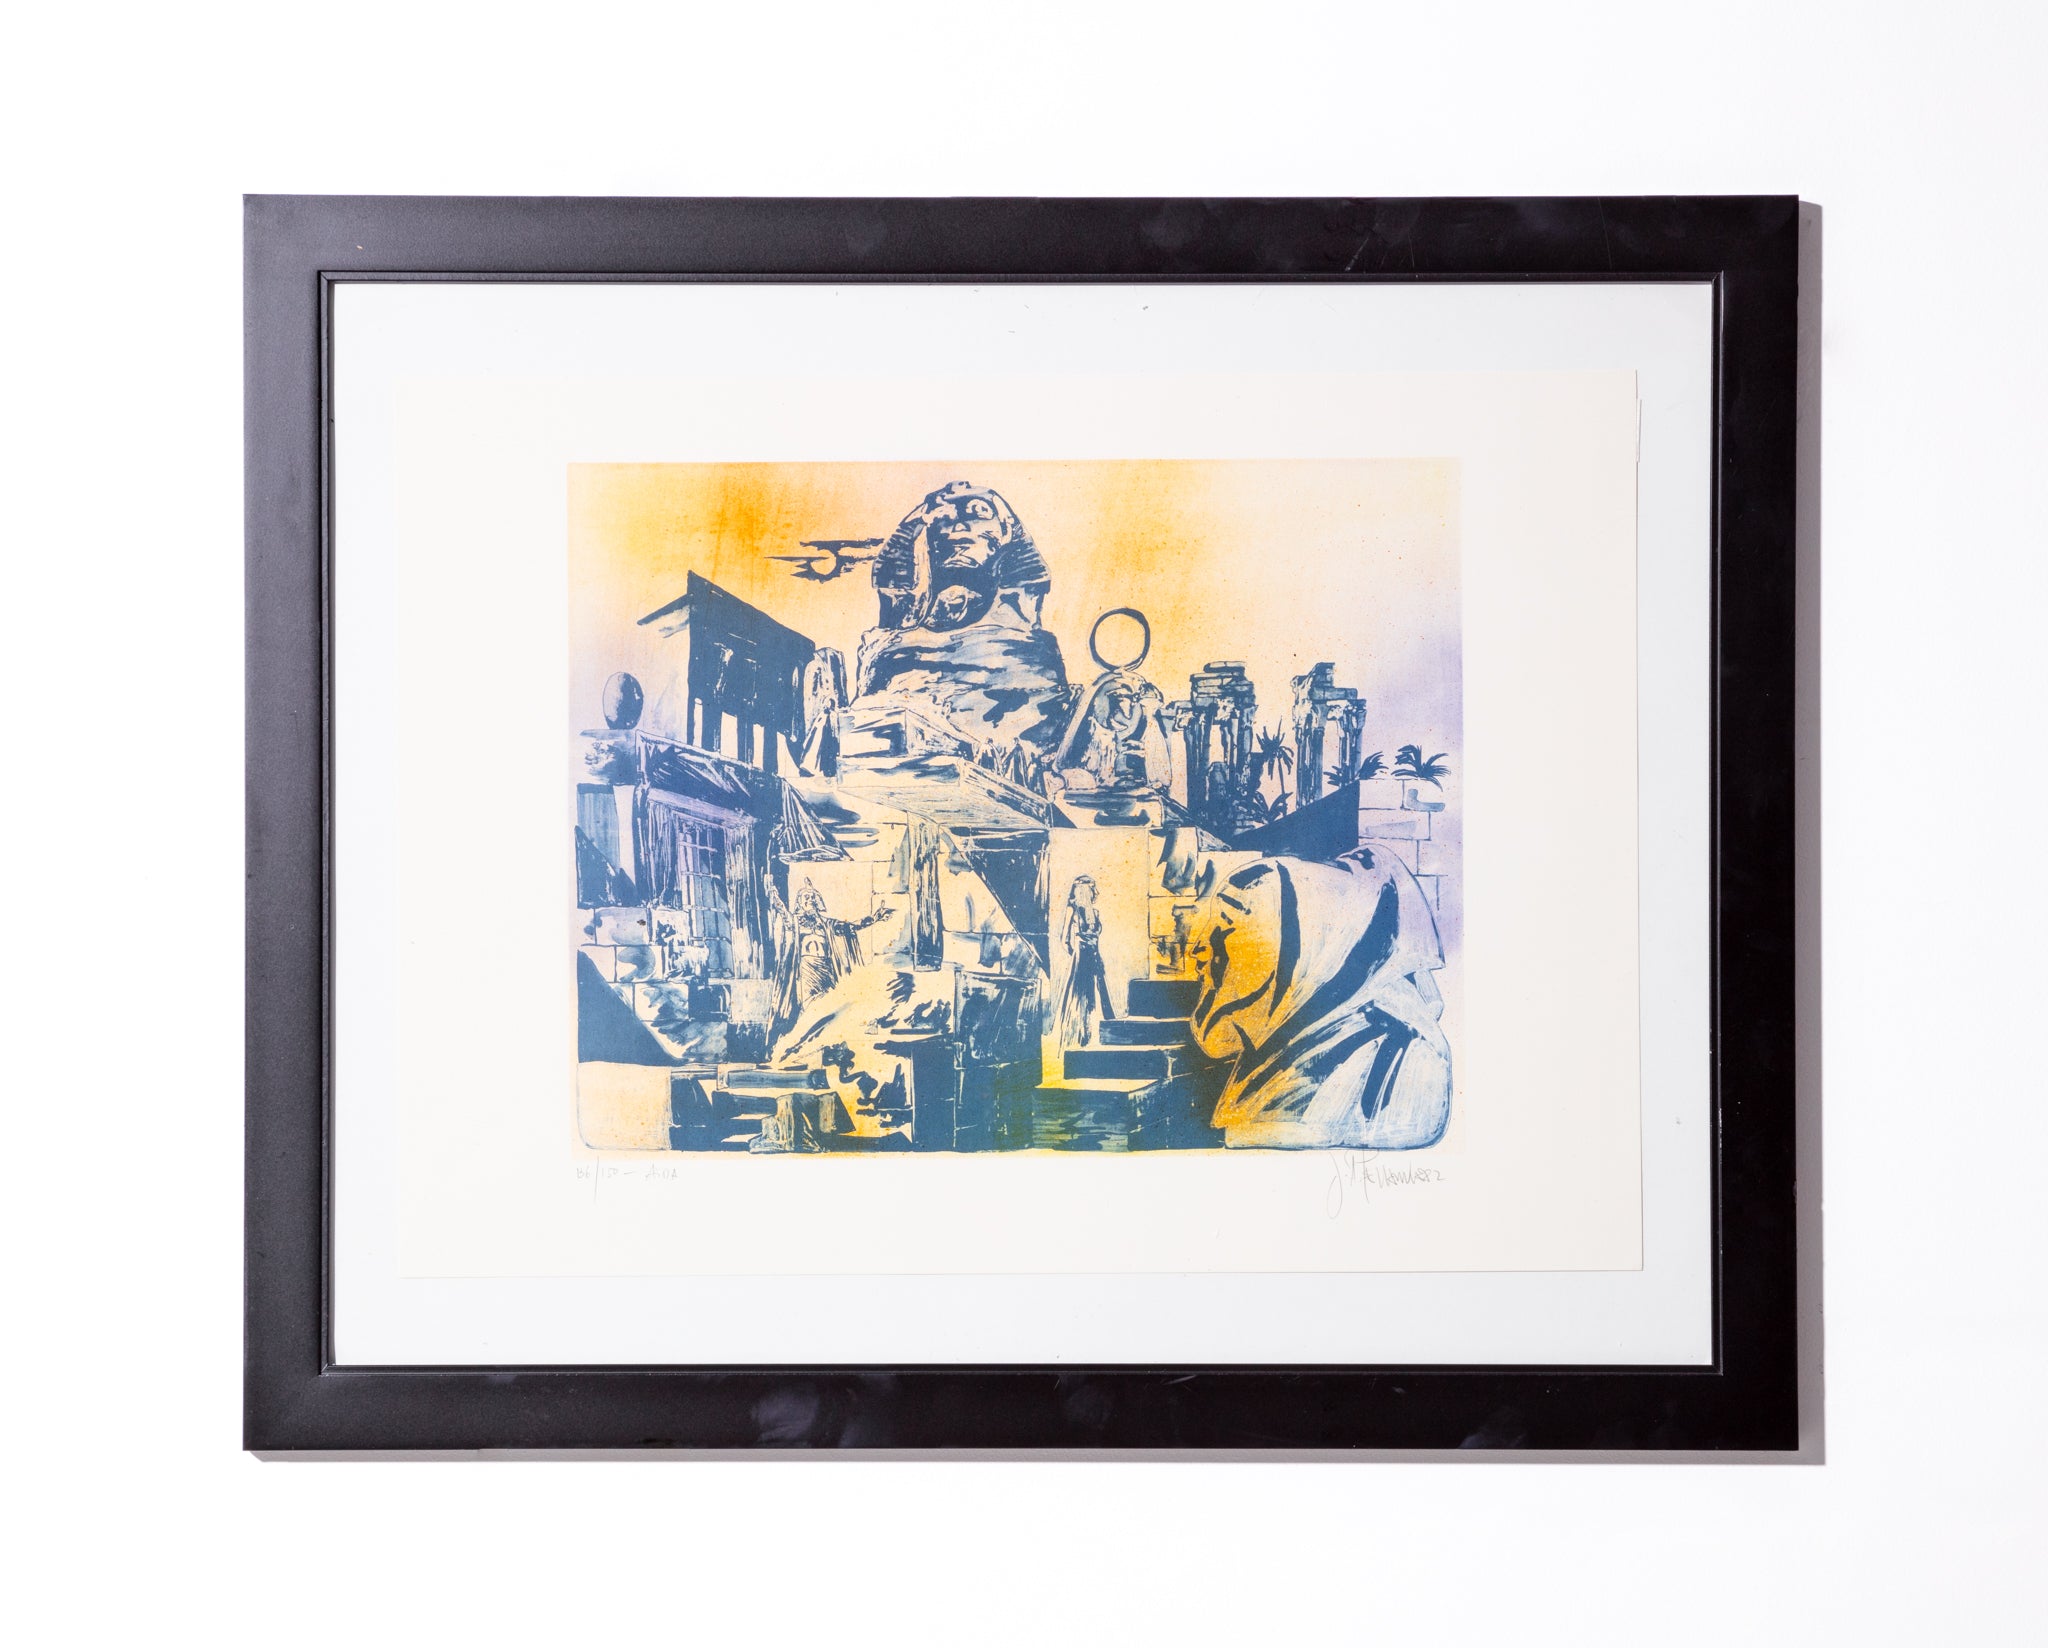 Framed blue and yellow linocut, titled after the opera "Aida". Hand signed and numbered.